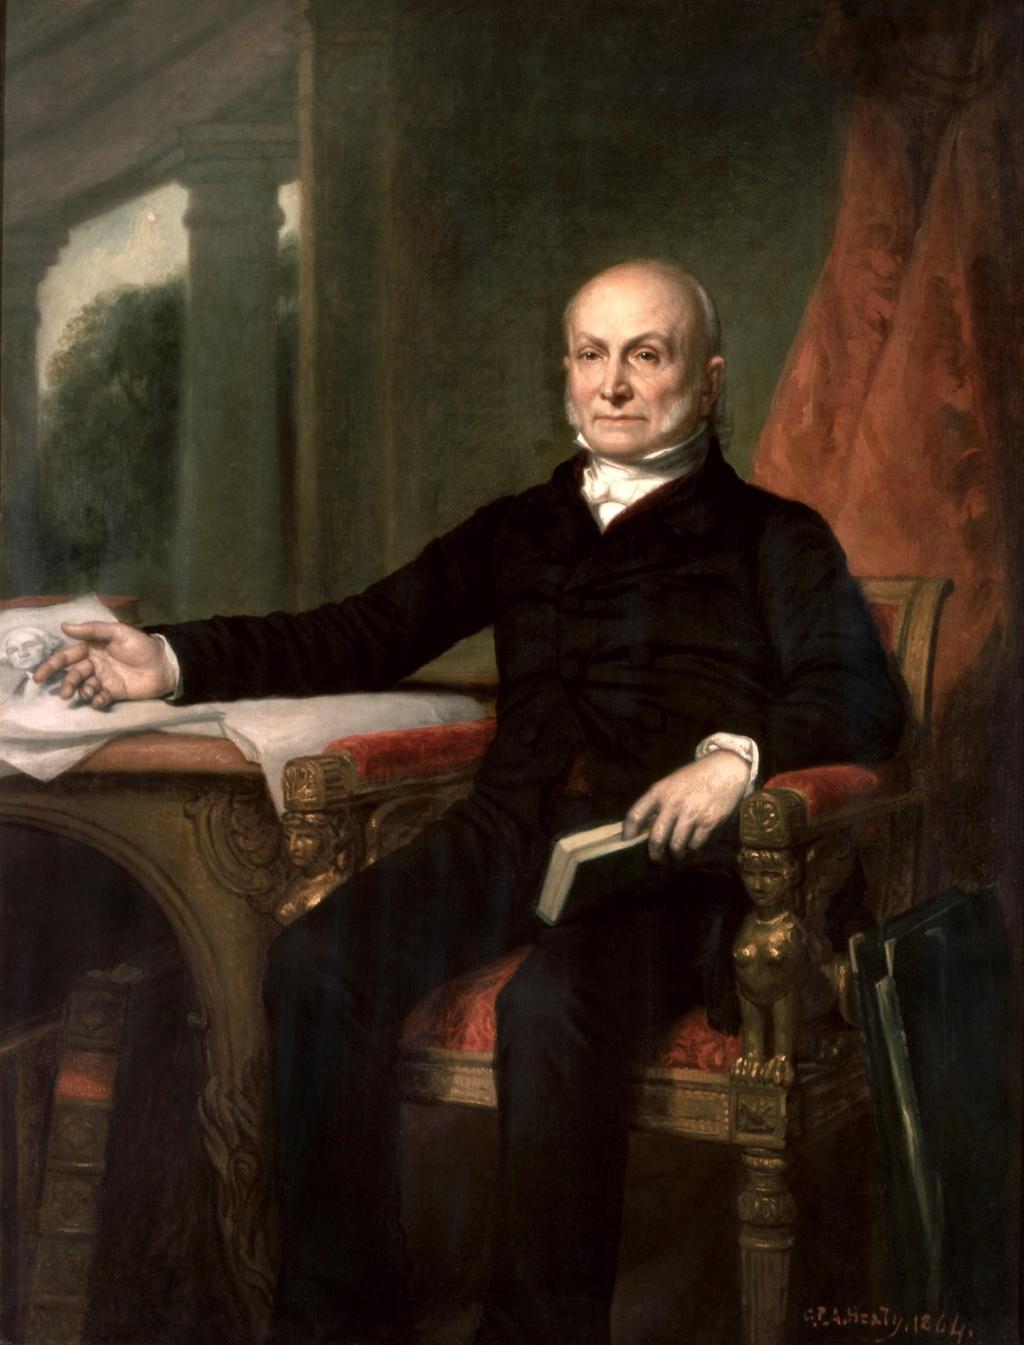 Nationalism Shapes Foreign Policy John Quincy Adams Secretary of State Foreign policy based on